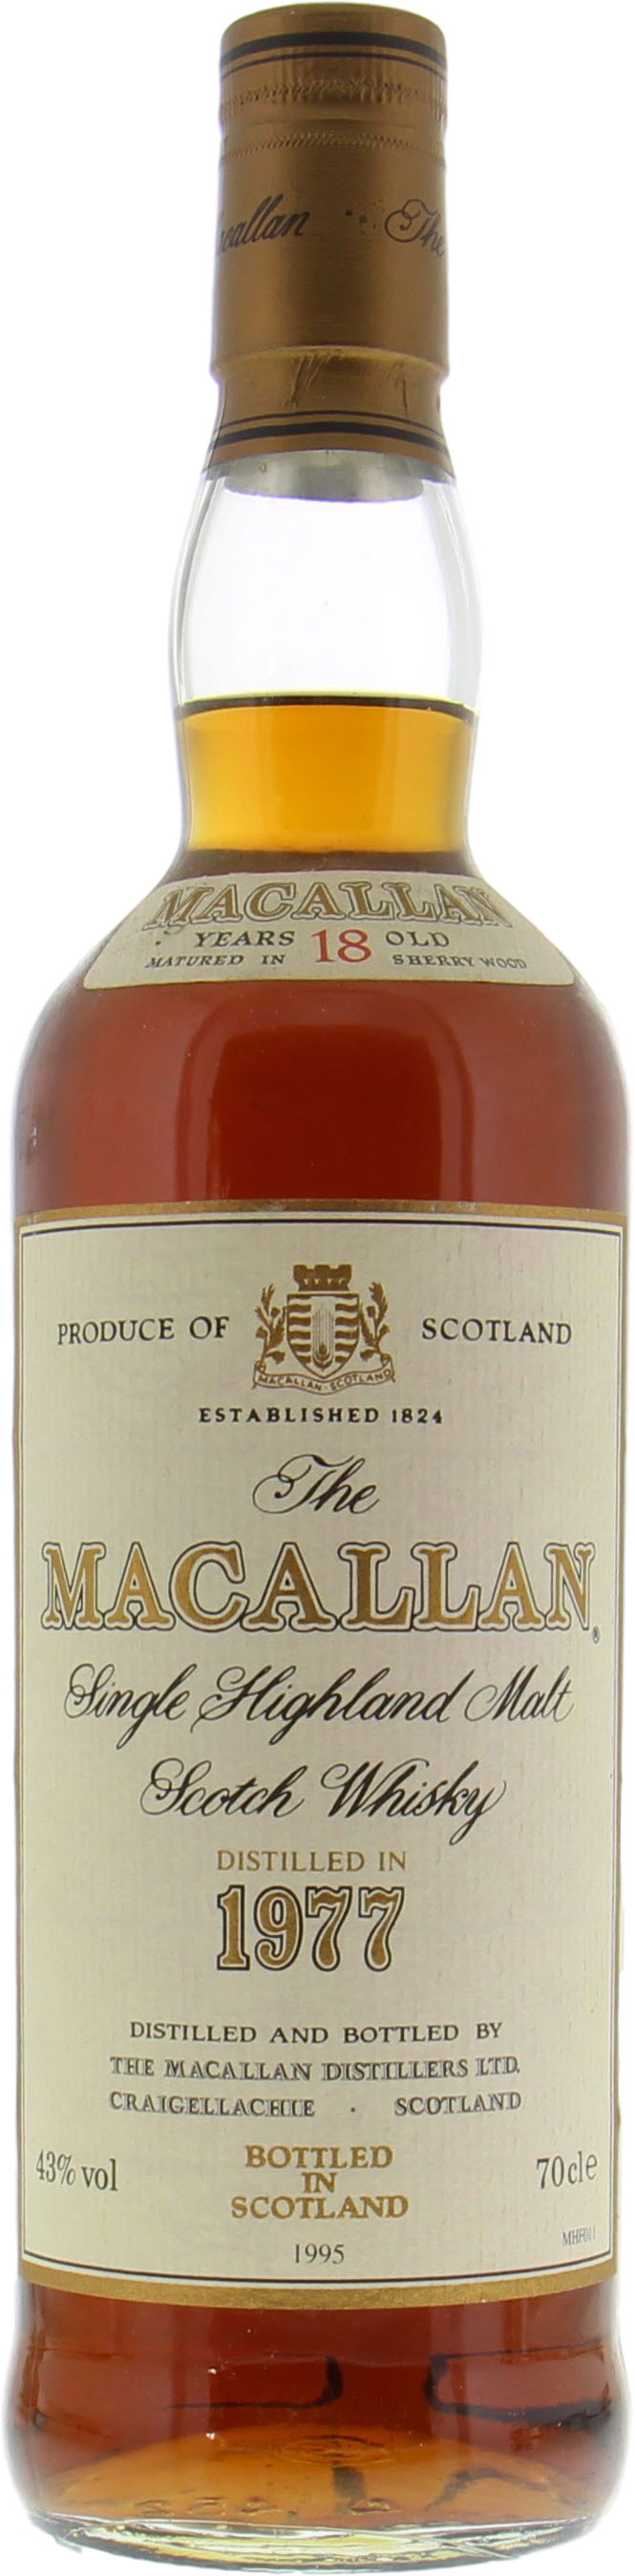 Macallan - 1977 Vintage 18 Years Old Sherry Cask 43% 1977 No Original Container